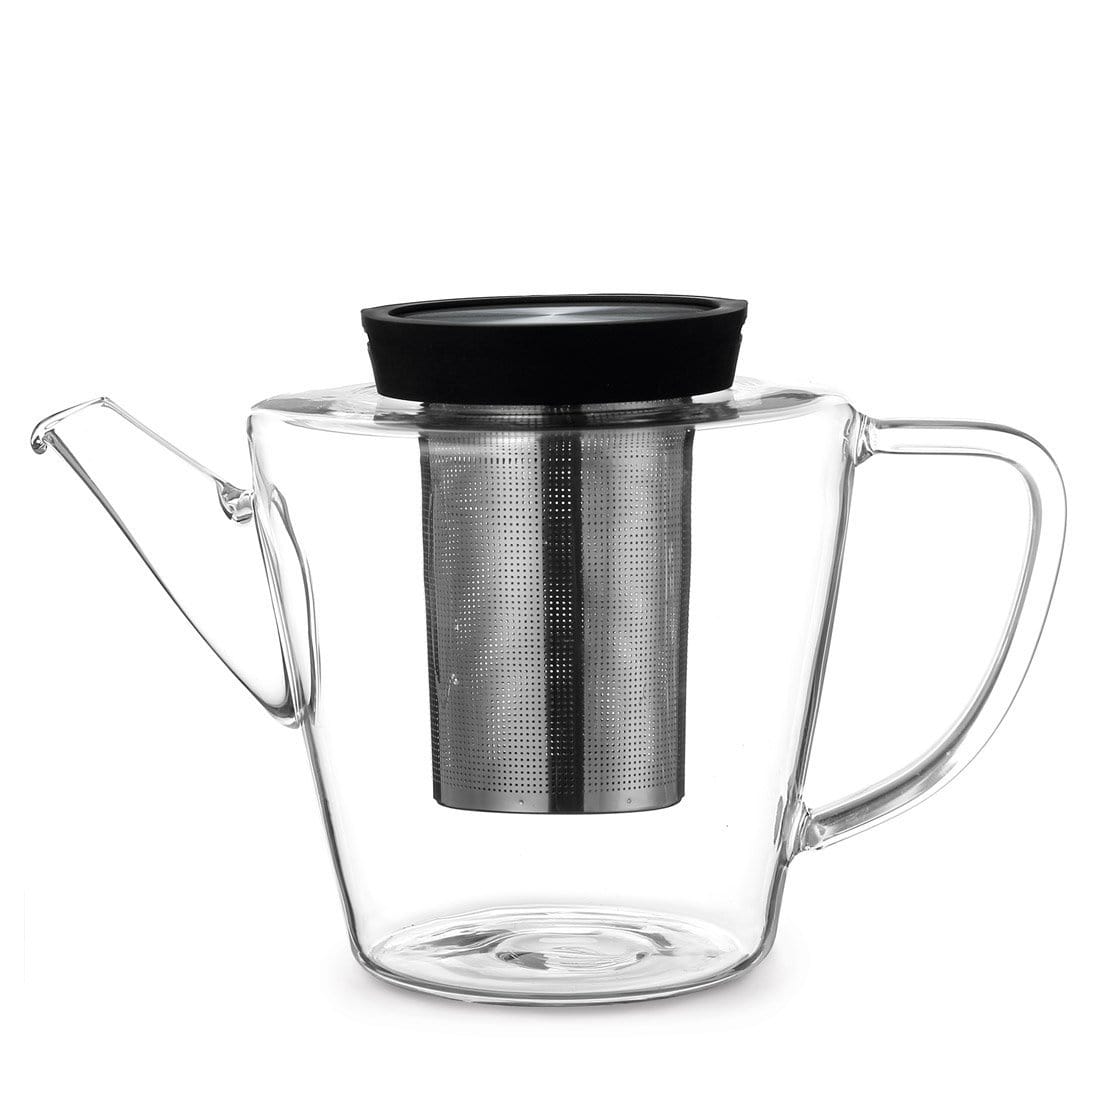 Electric kettle for infusions and herbal teas